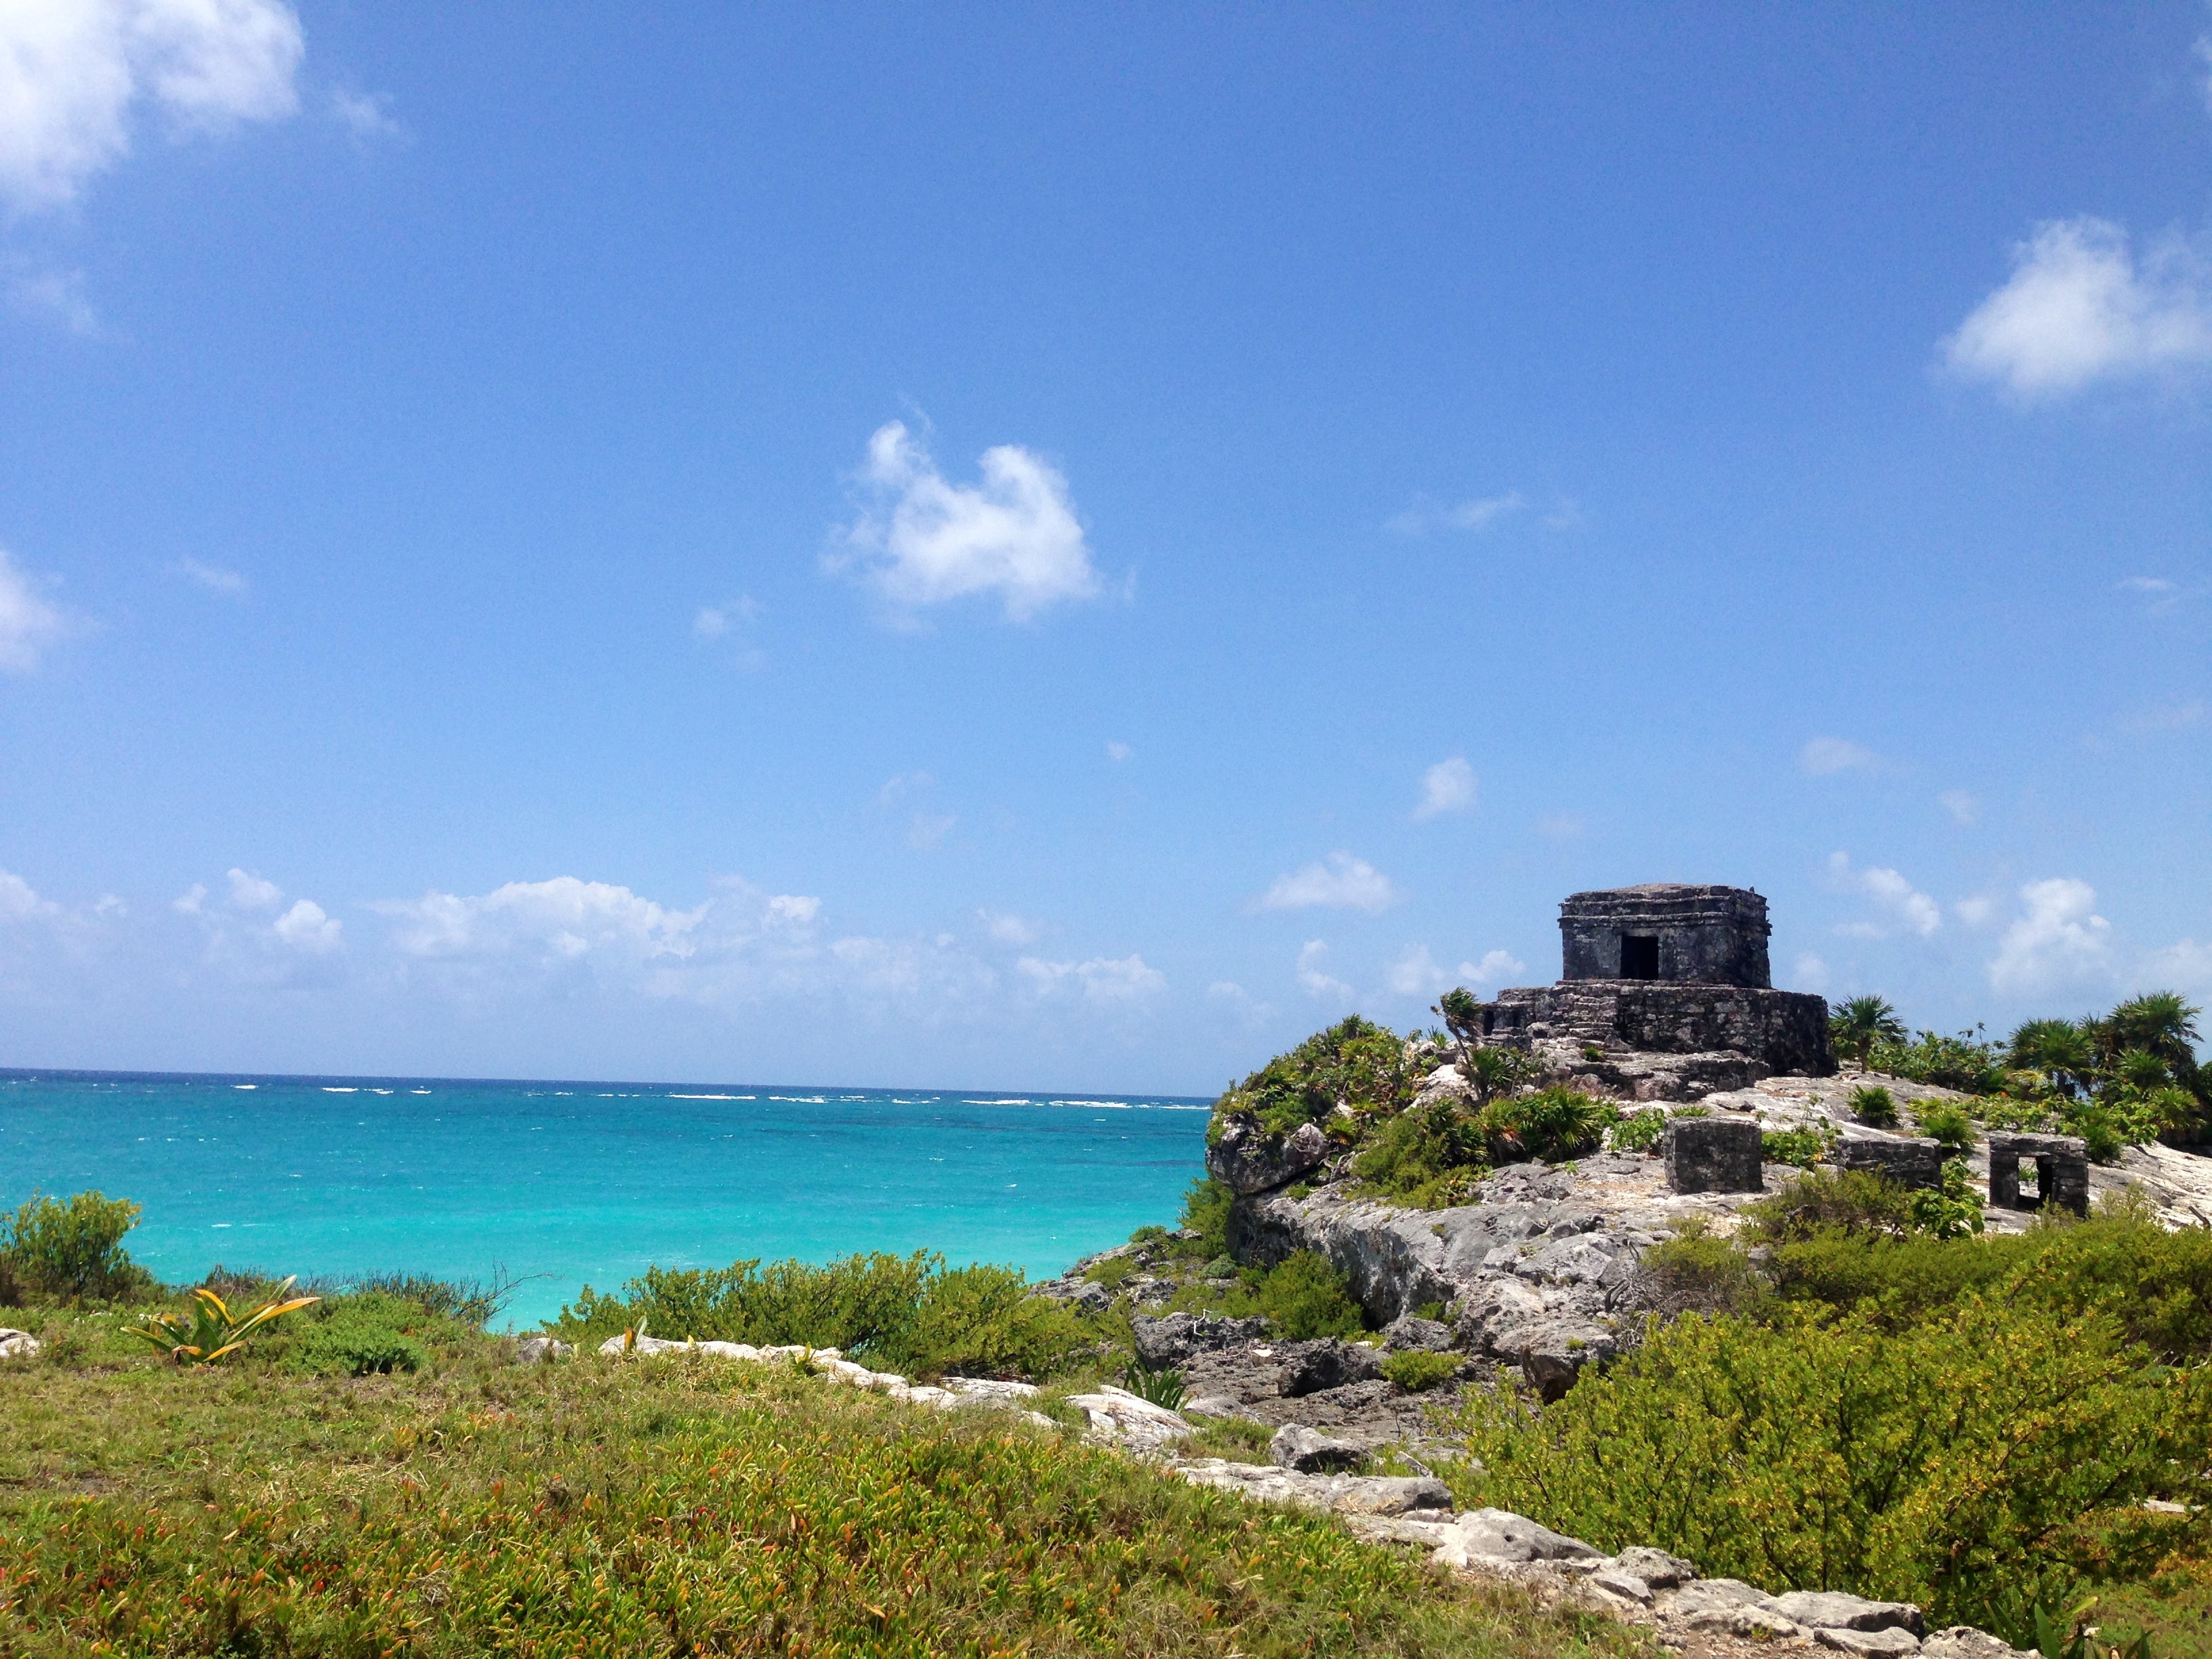 Courtenay Adventures to the Mayan Ruins in Tulum, Mexico|www.extremelysharplife.com